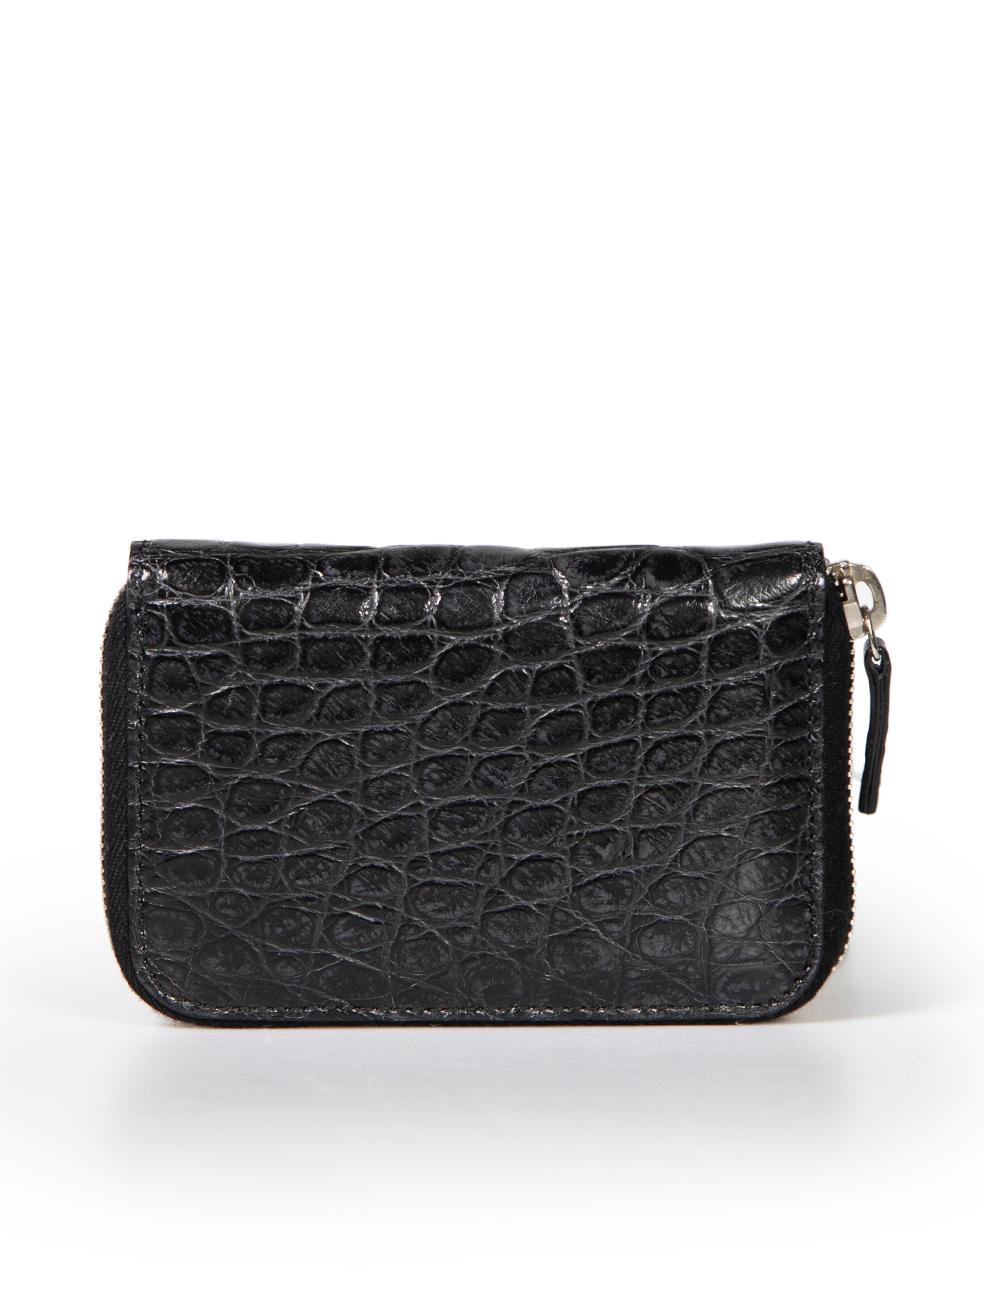 Gucci Black Crocodile Skin Cardholder Wallet In Good Condition For Sale In London, GB